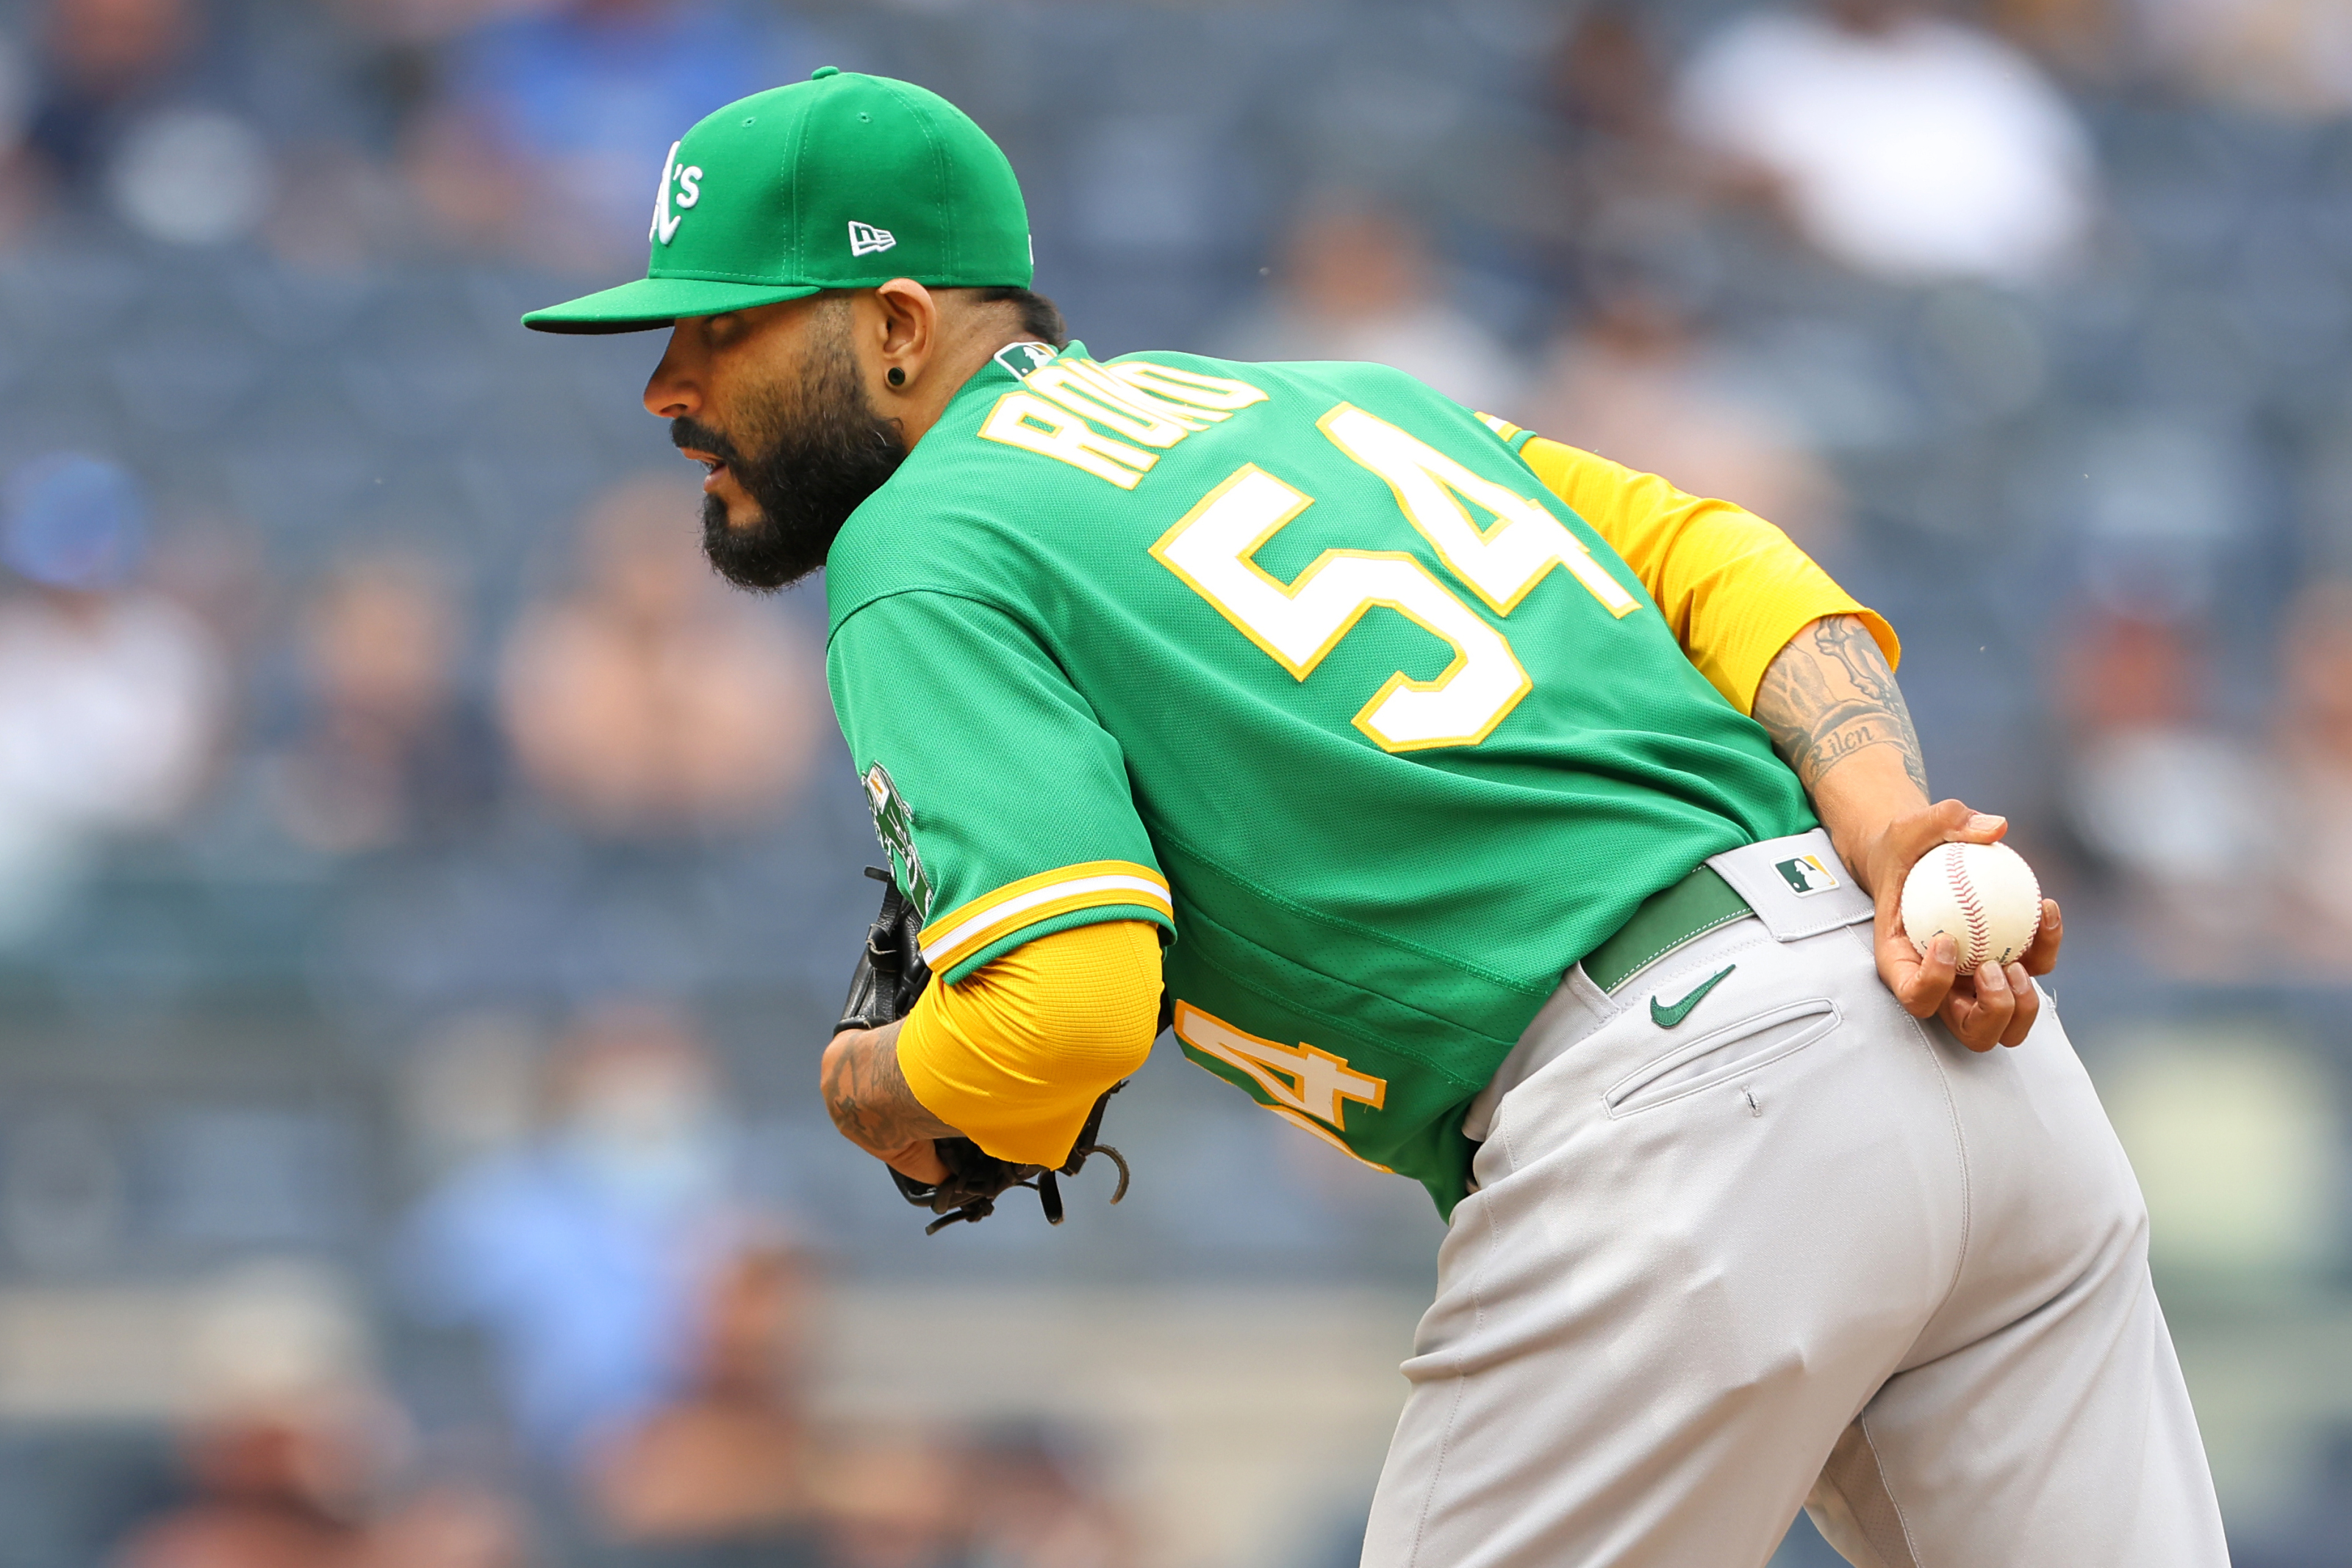 Sergio Romo gets great deal after dropping pants on diamond